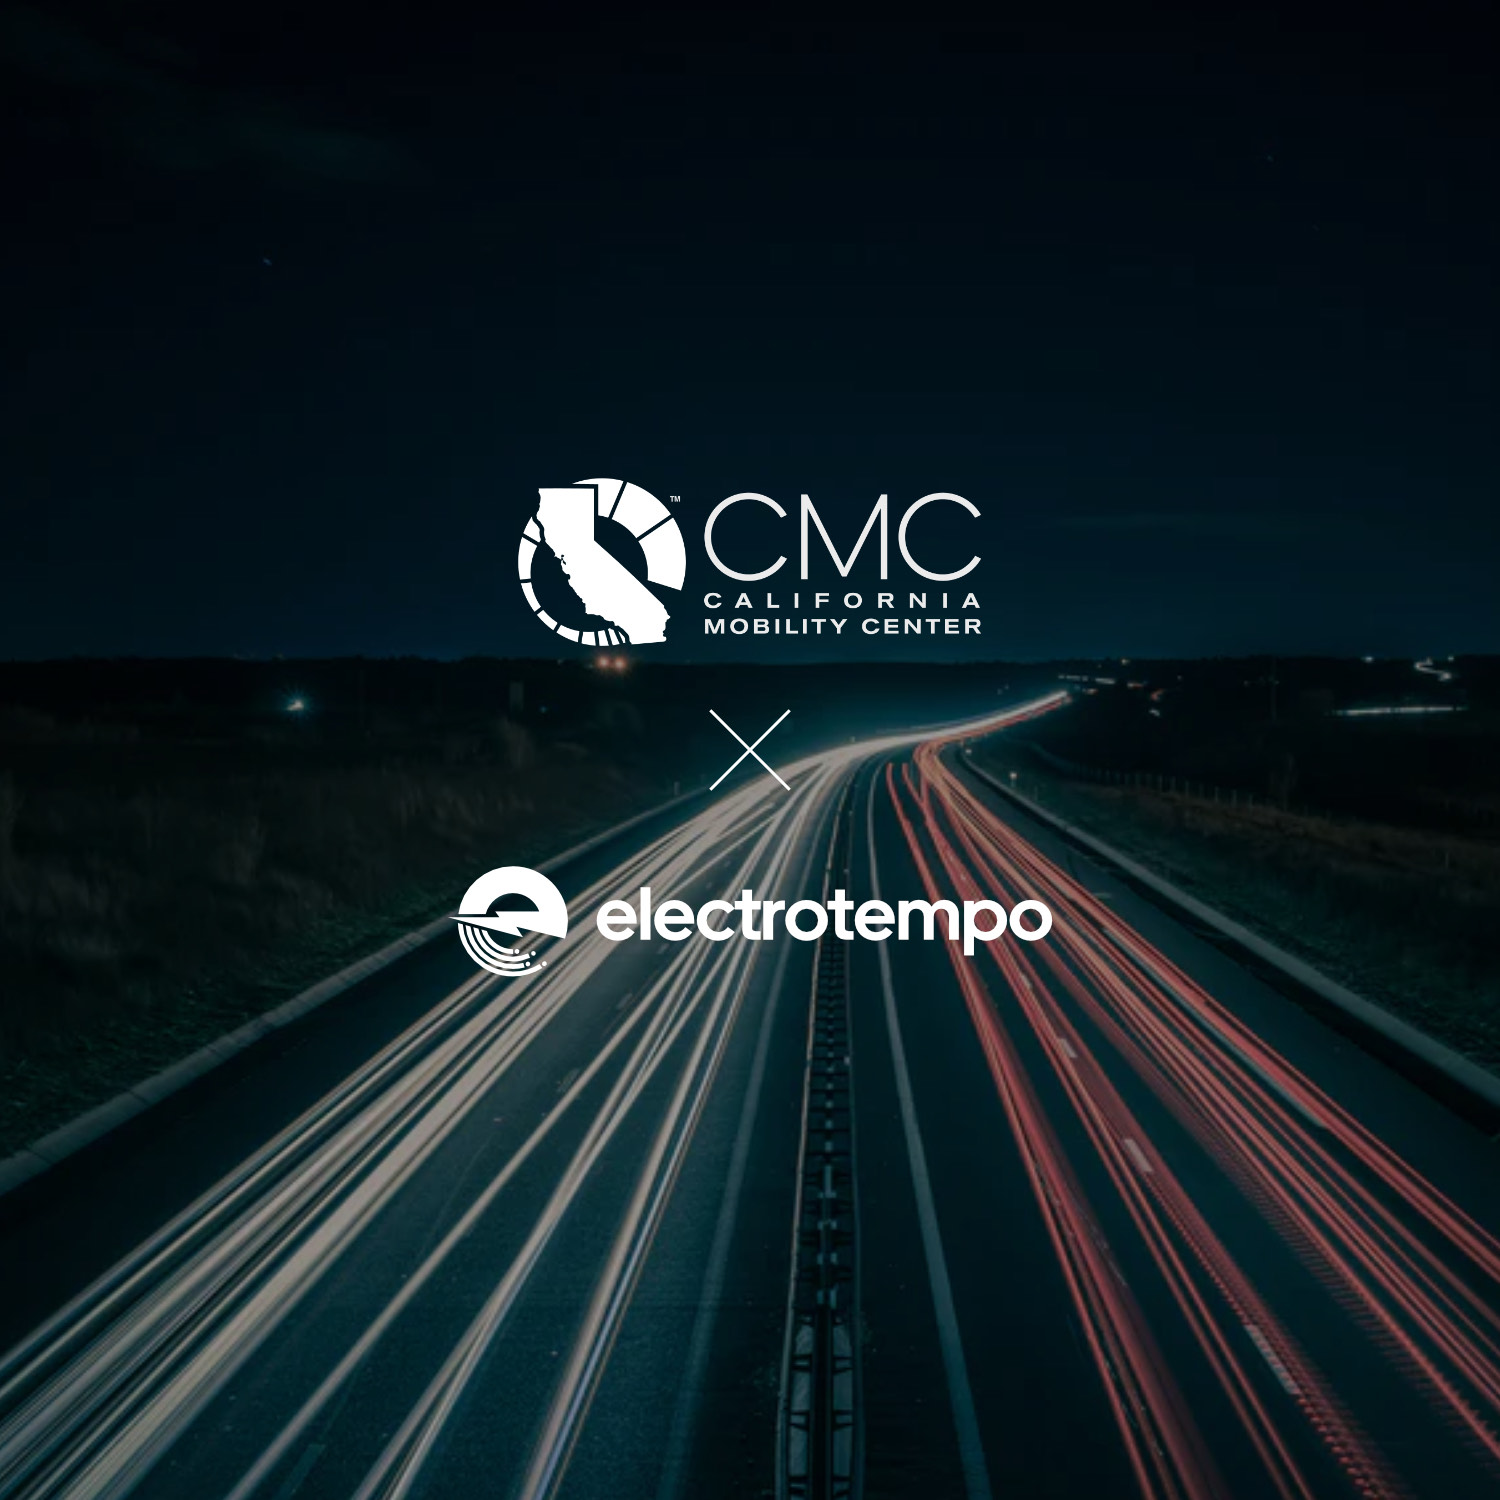 Featured Image for “ElectroTempo accepted into the CMC global mobility ecosystem!”